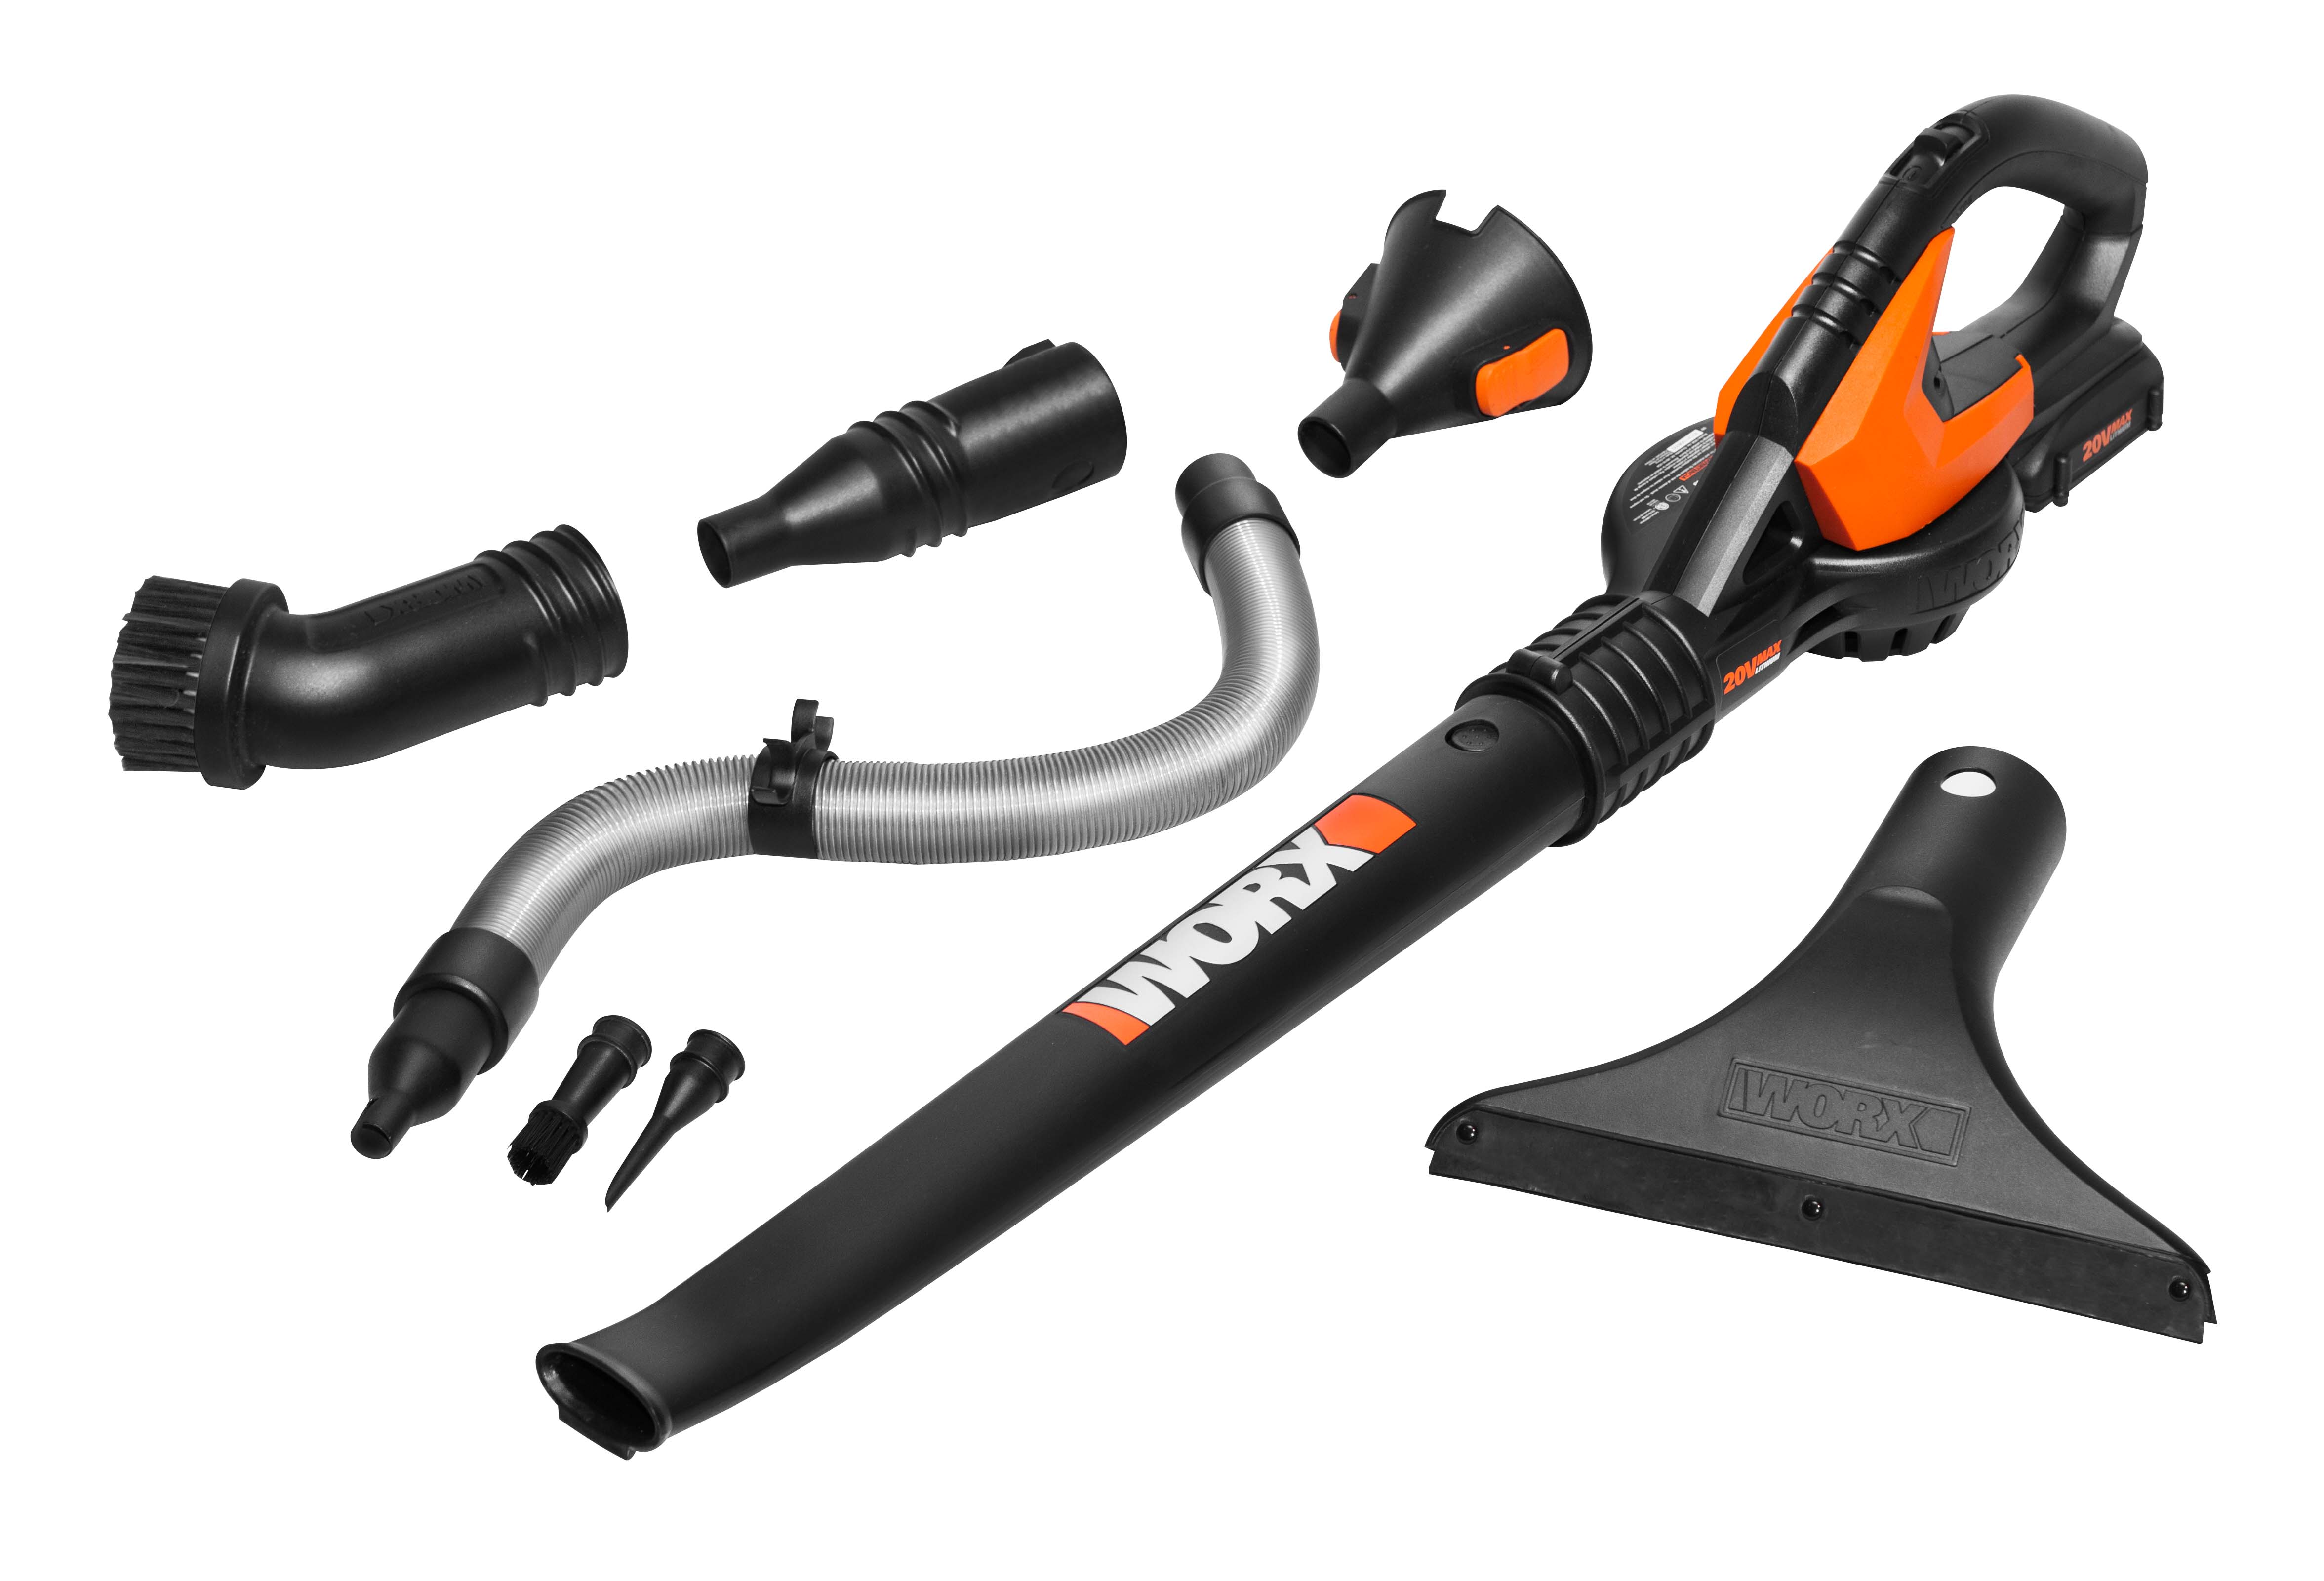 WORX AIR Attachments fit WORX 20V and 32V Blower/Sweepers